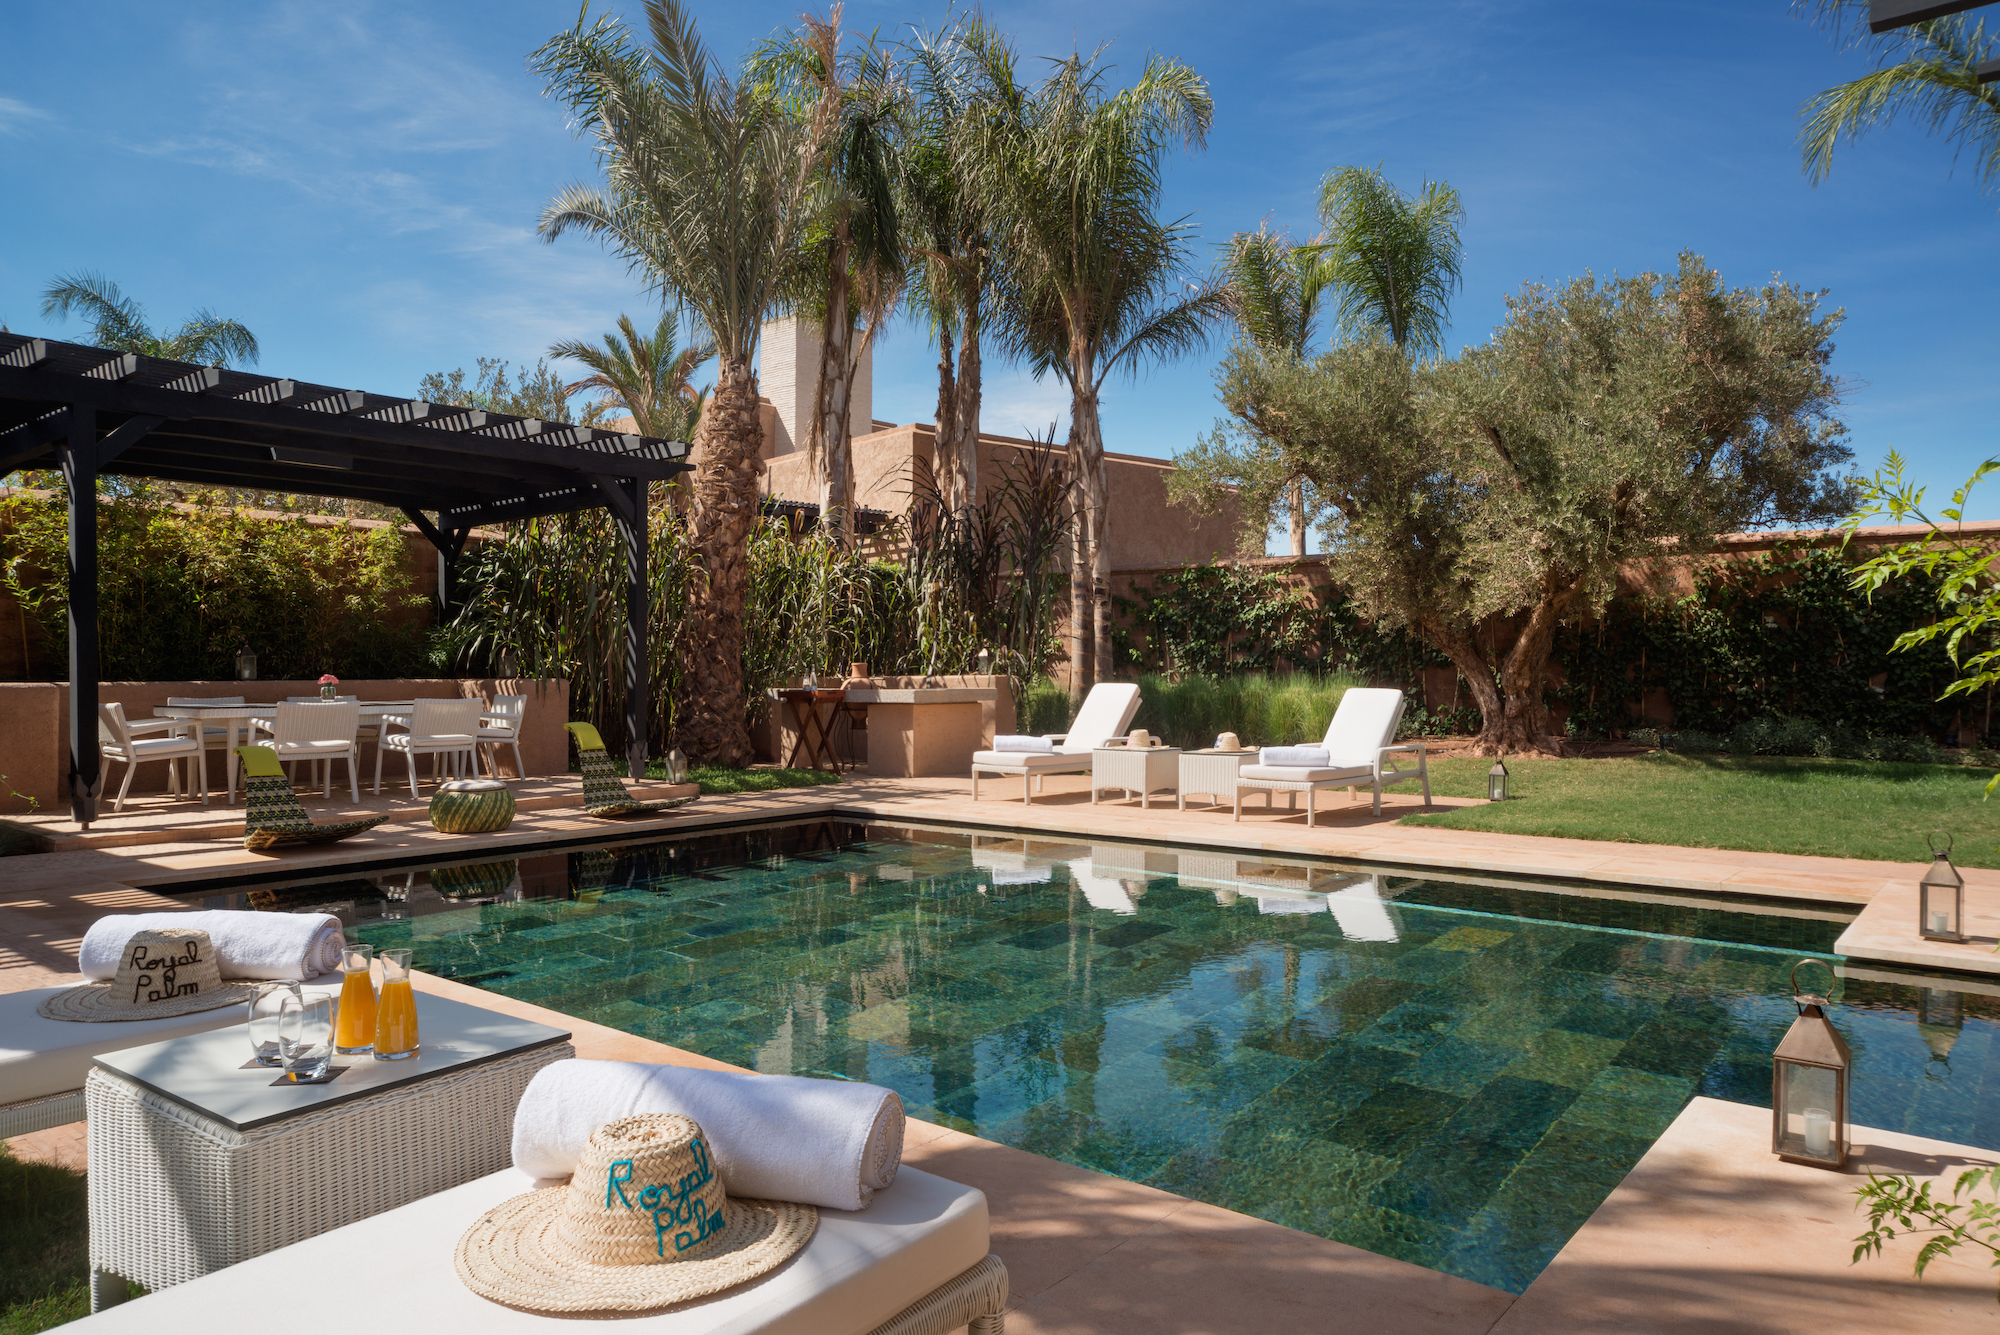 Fairmont Royal Palm: The Hotel Haven On The Outskirts Of Marrakech